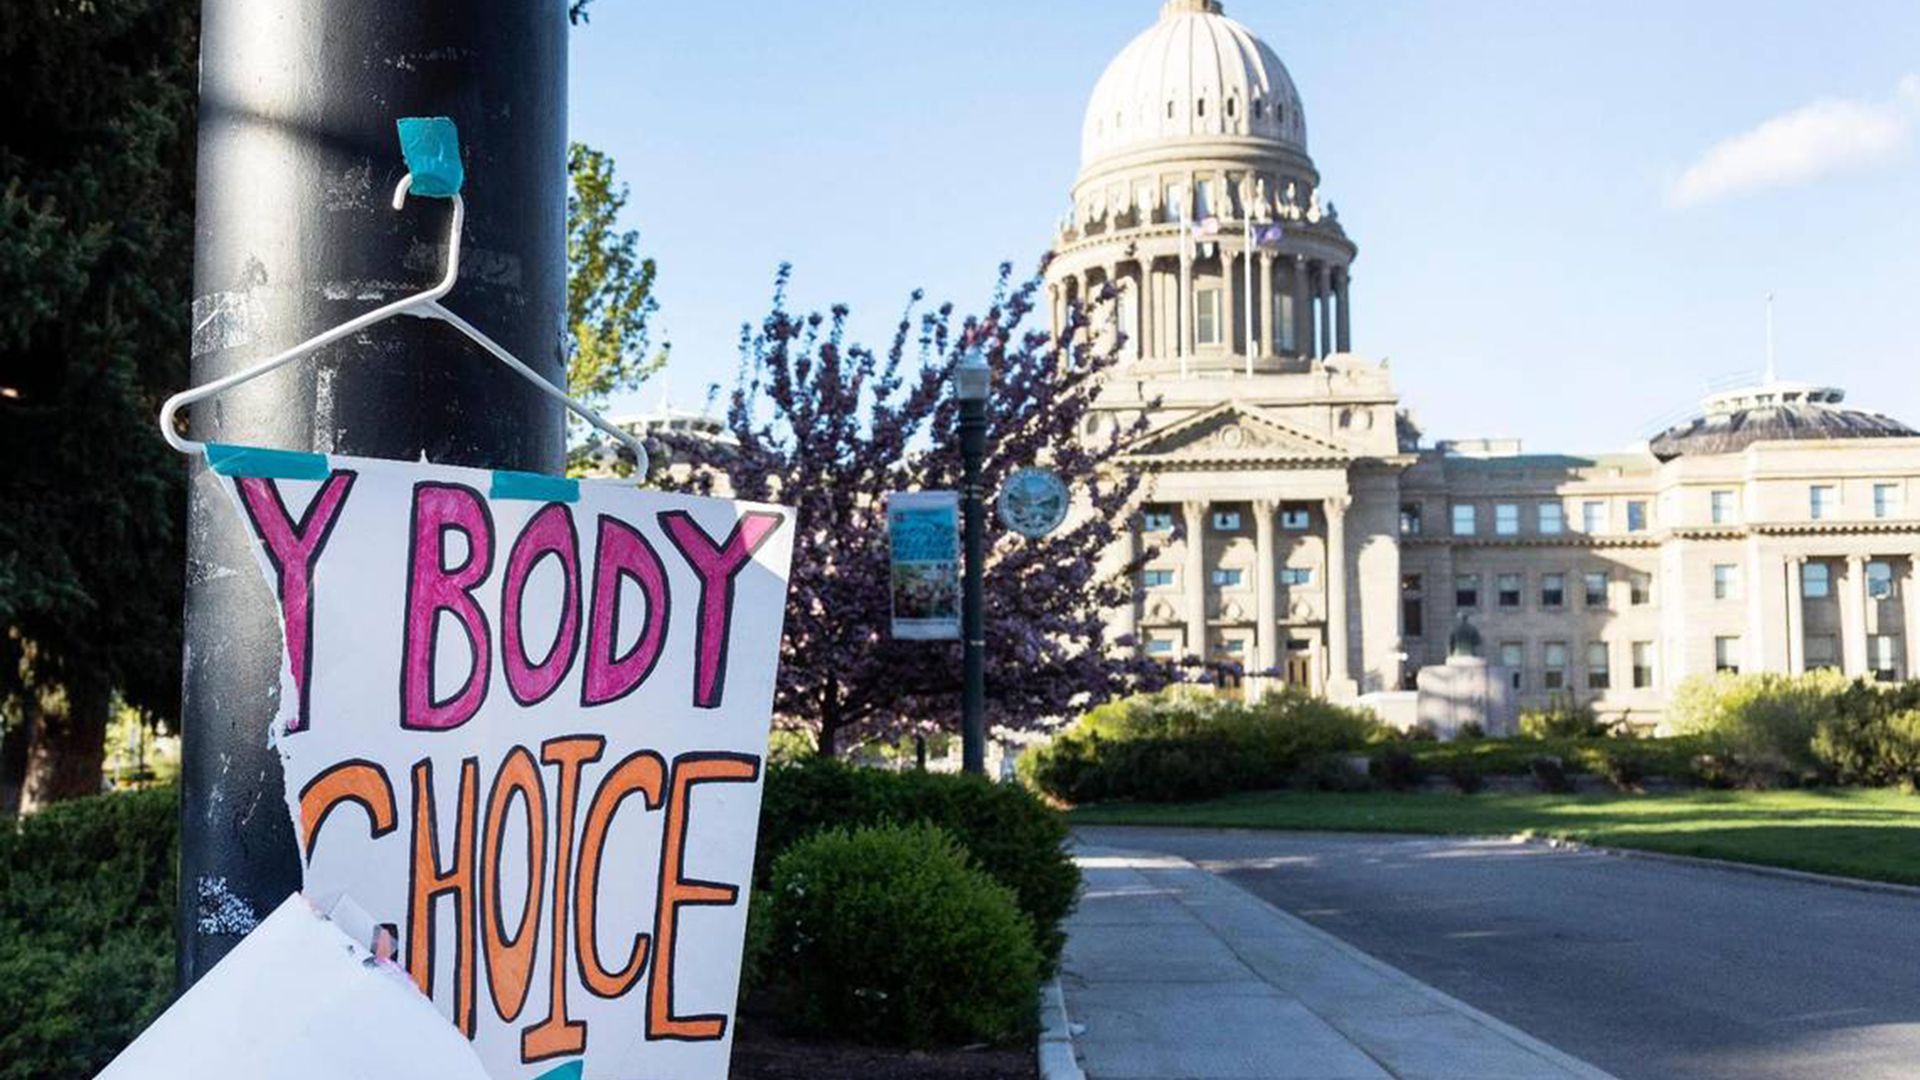 Picture of a ripped sign that says "my body my choice" taped on a pole in front of the Idaho state Capitol